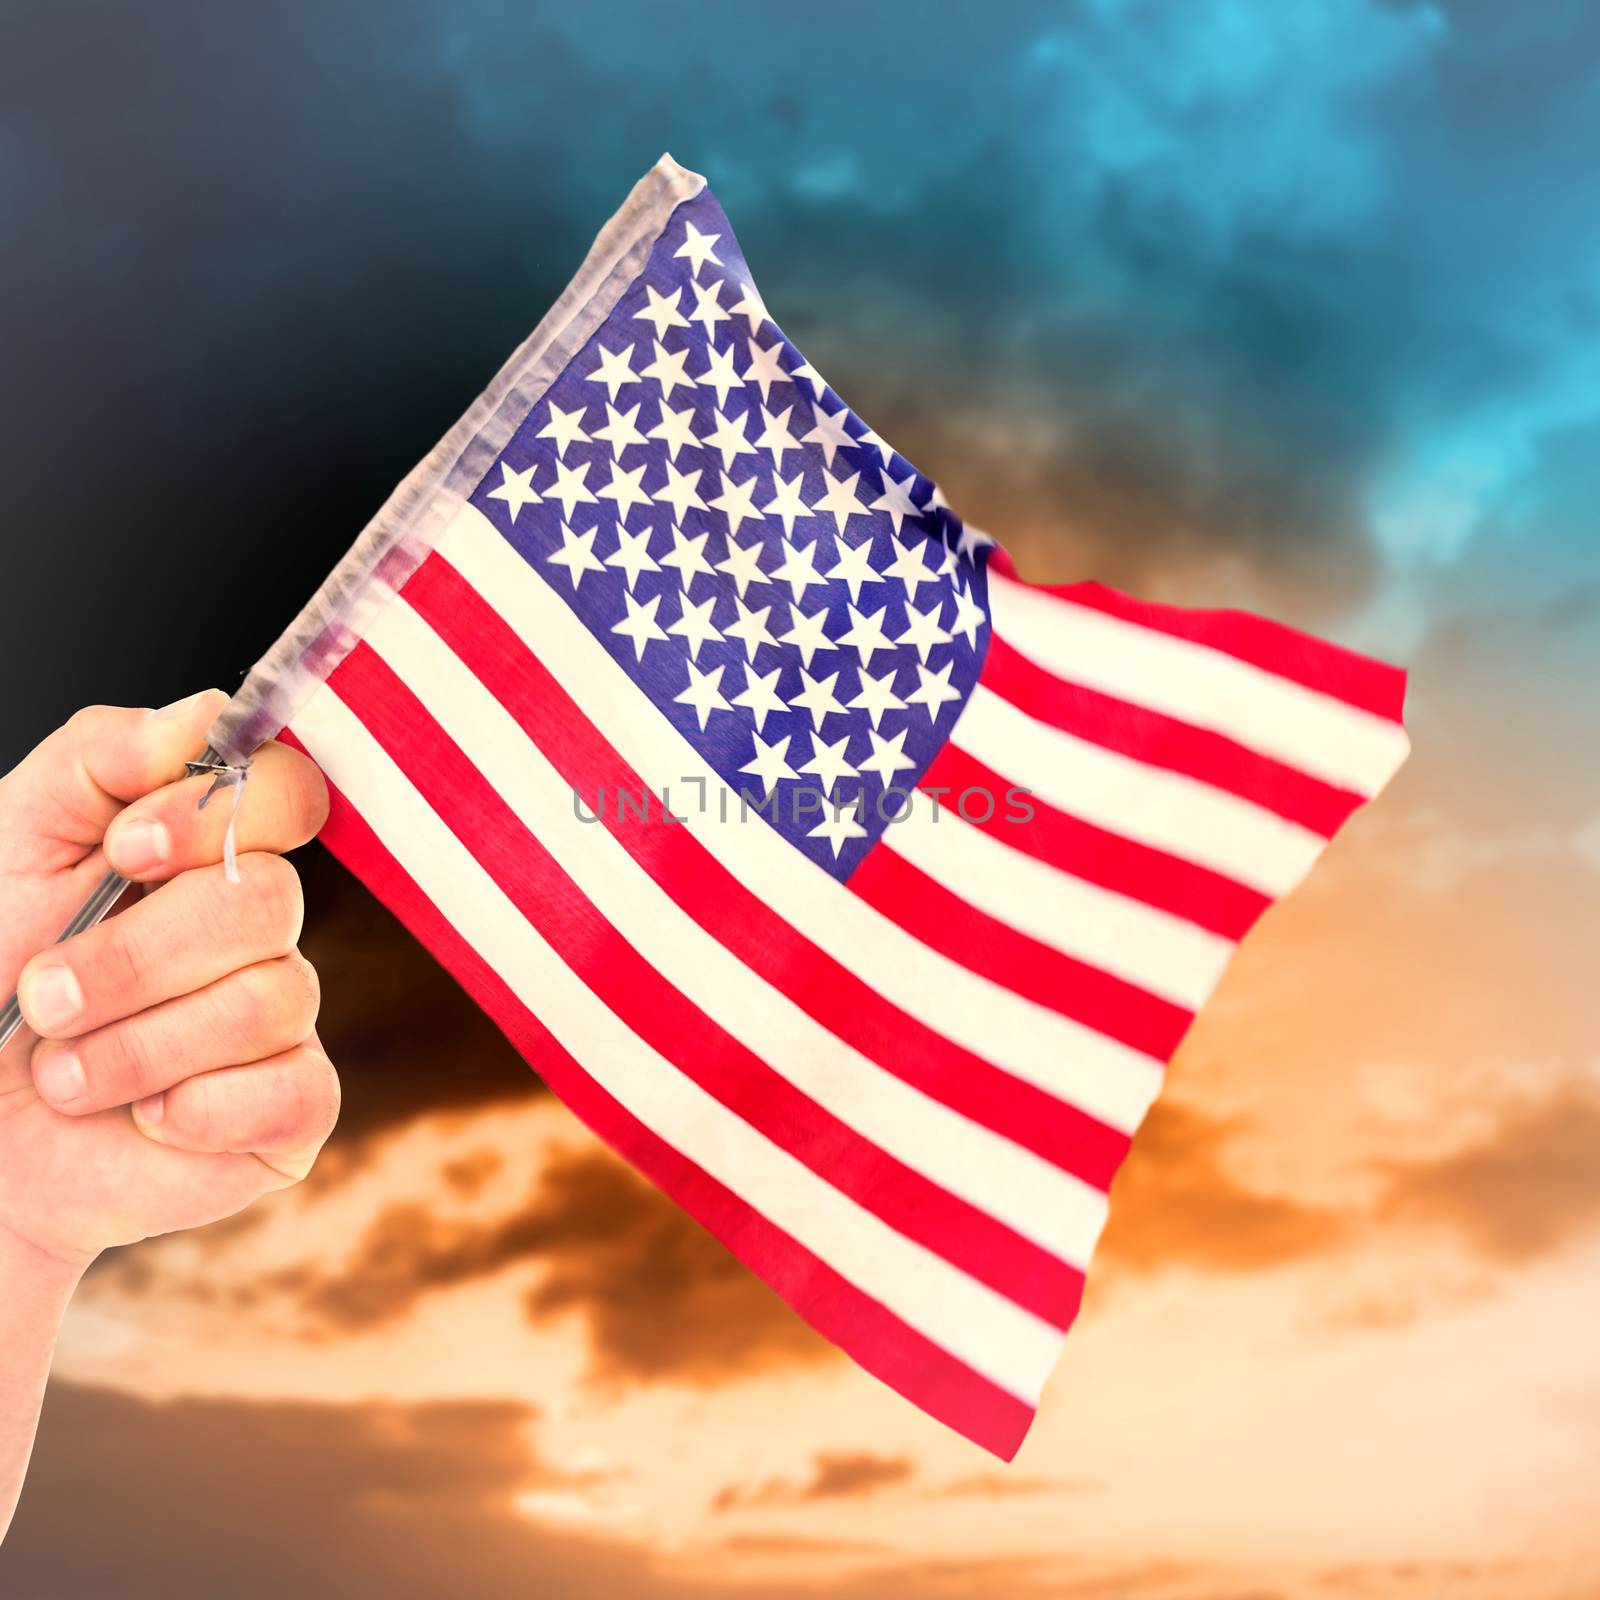 Hand waving american flag against green grass under blue and orange sky